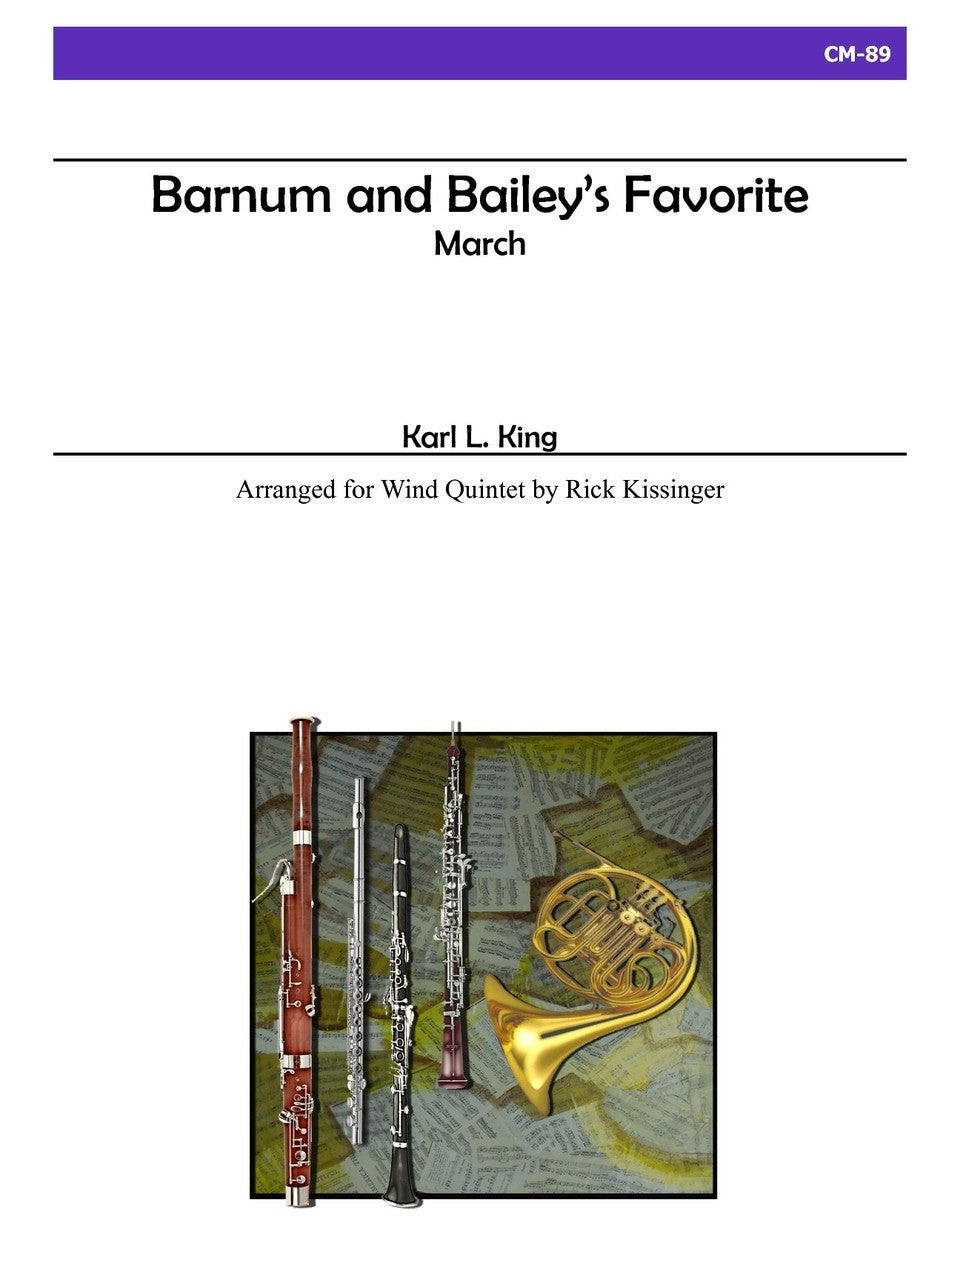 King (arr. Rick Kissinger) - Barnum and Bailey's Favorite - March